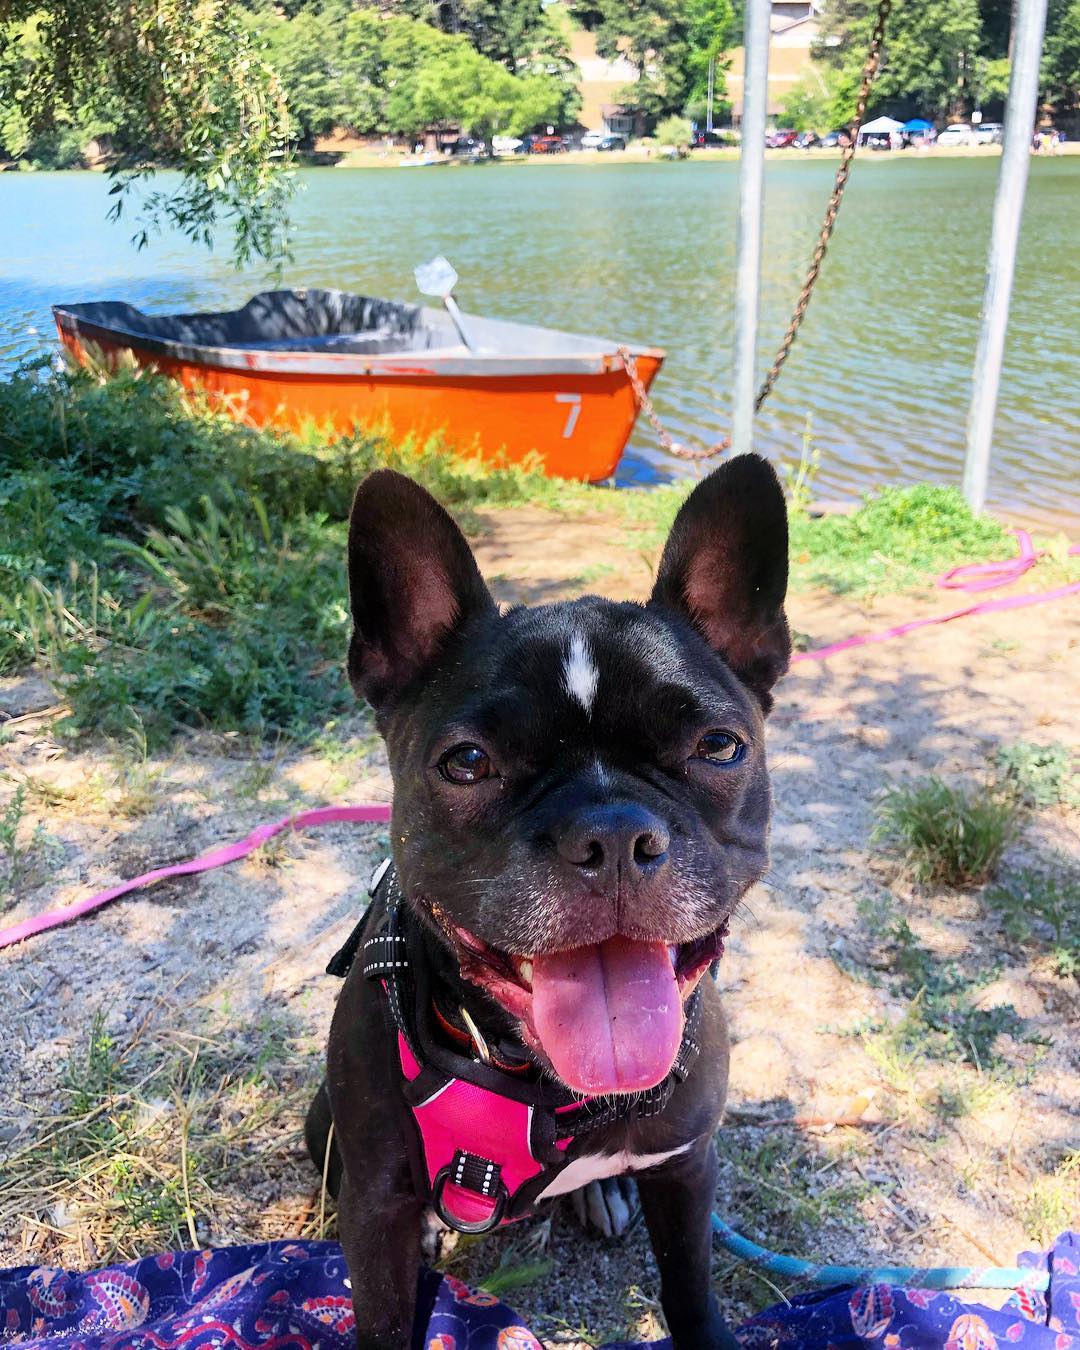 A happy Boston Terrier sitting on the ground by the lake with a boat floating in the water